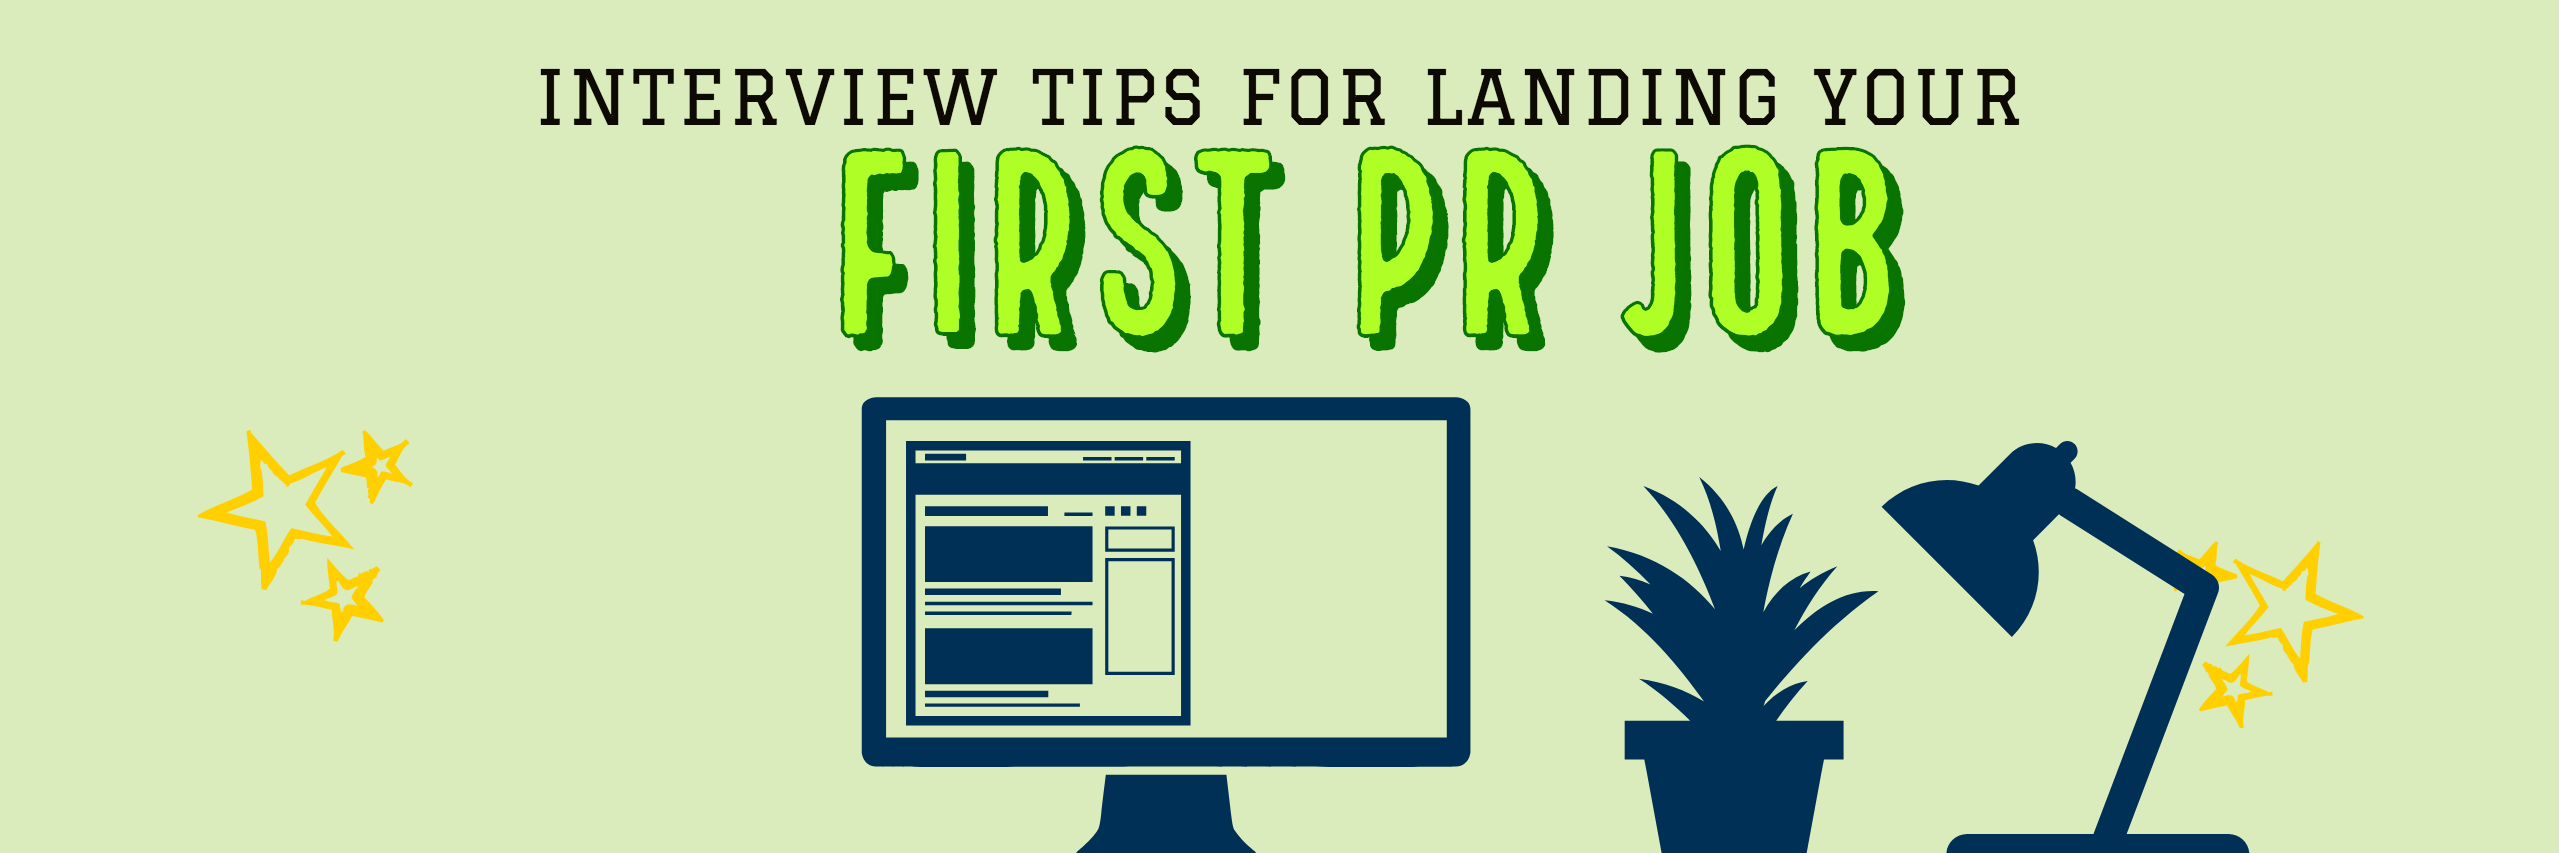 Interview Tips for Landing your First PR Job